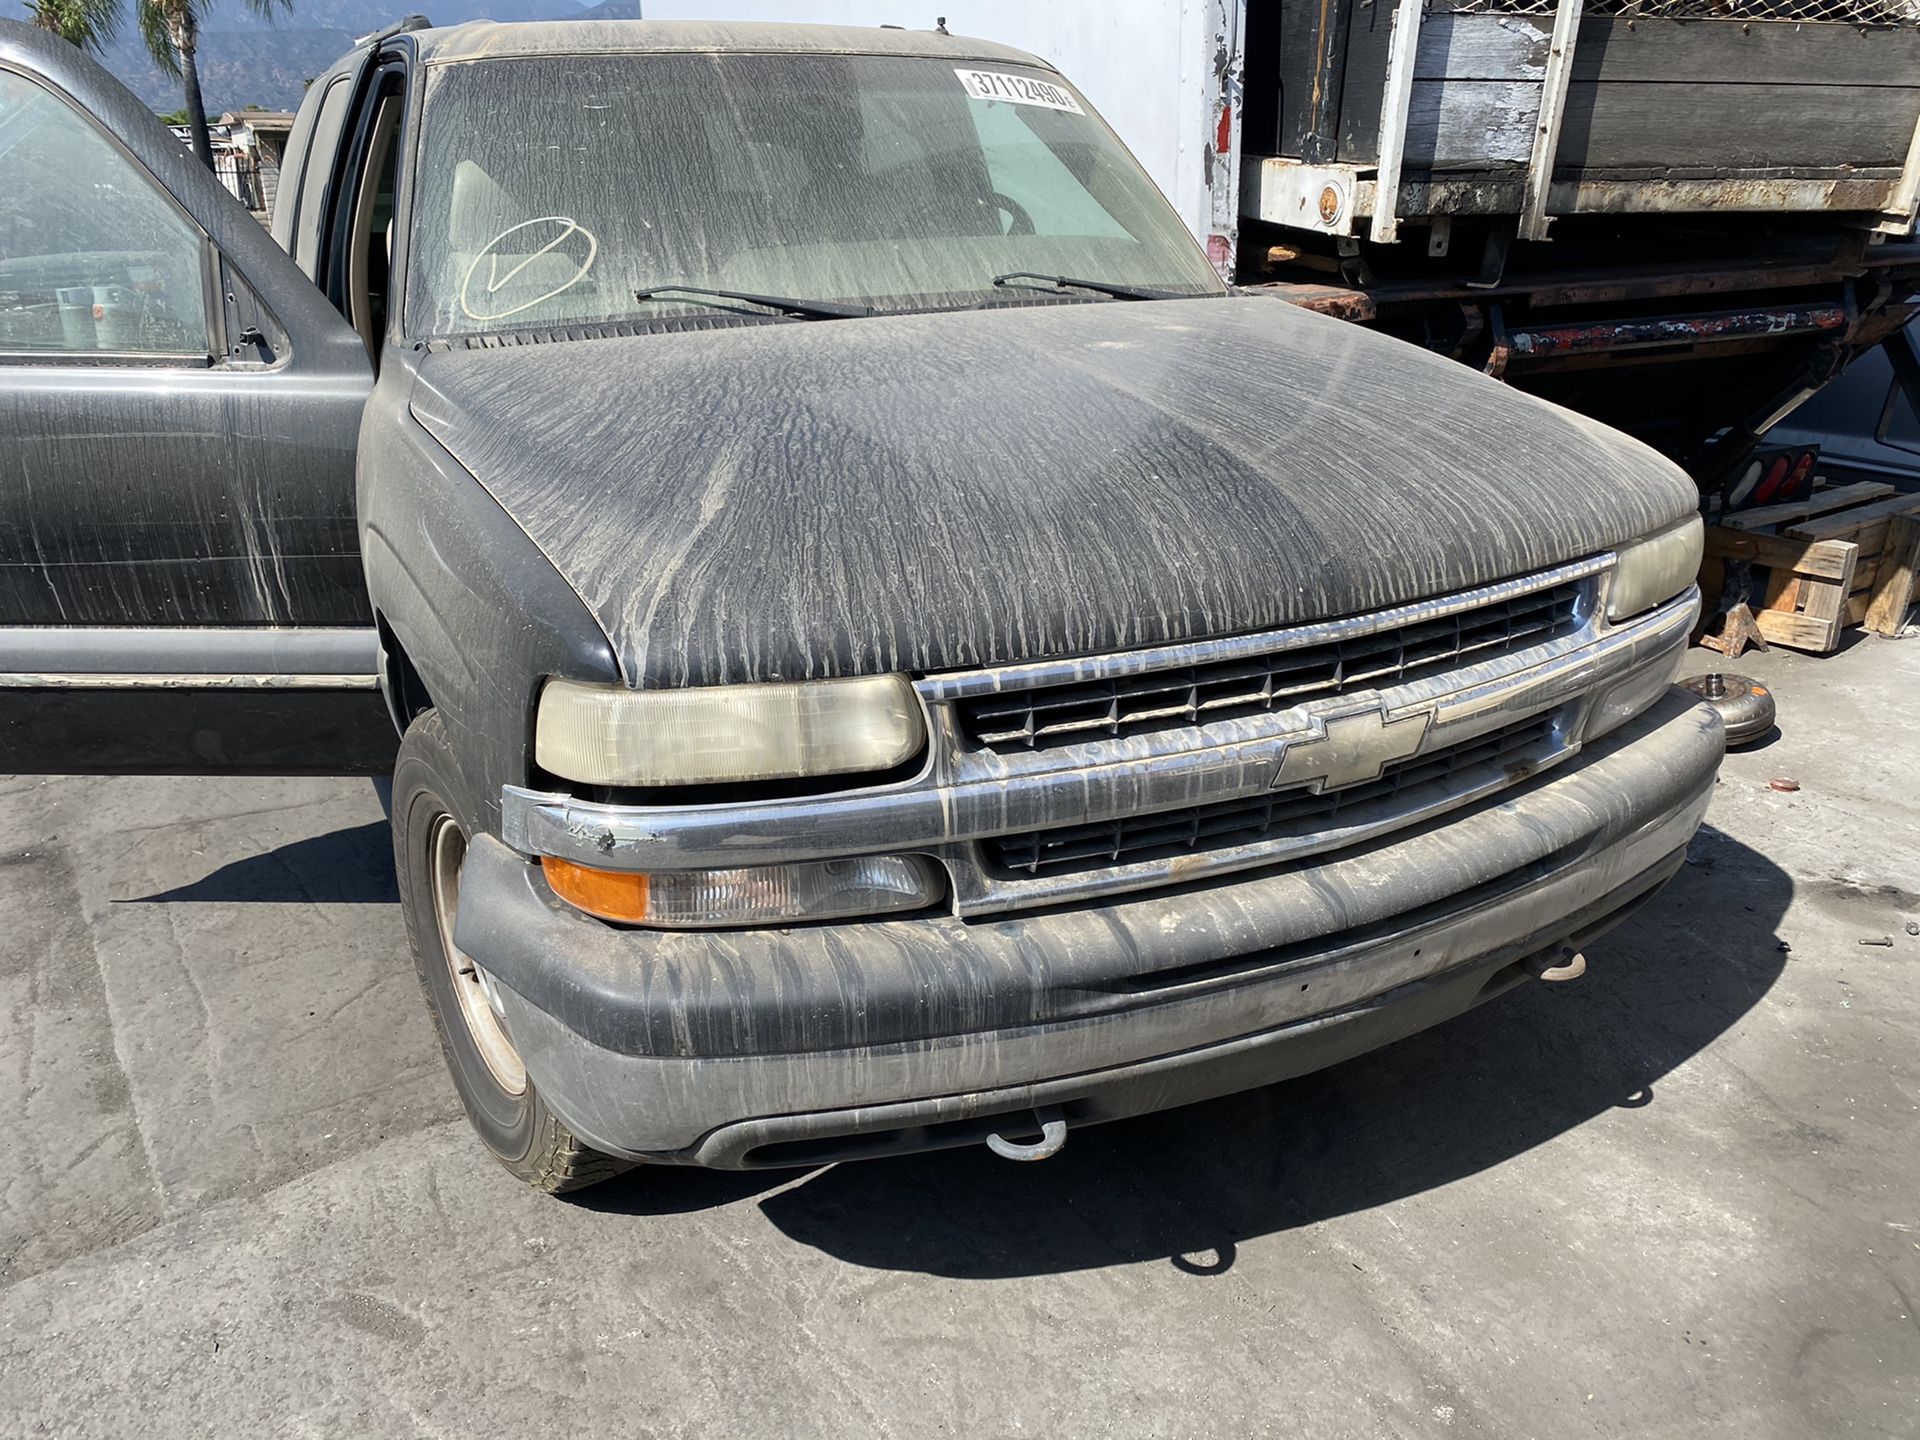 Chevy suburban 2002 PARTING OUT